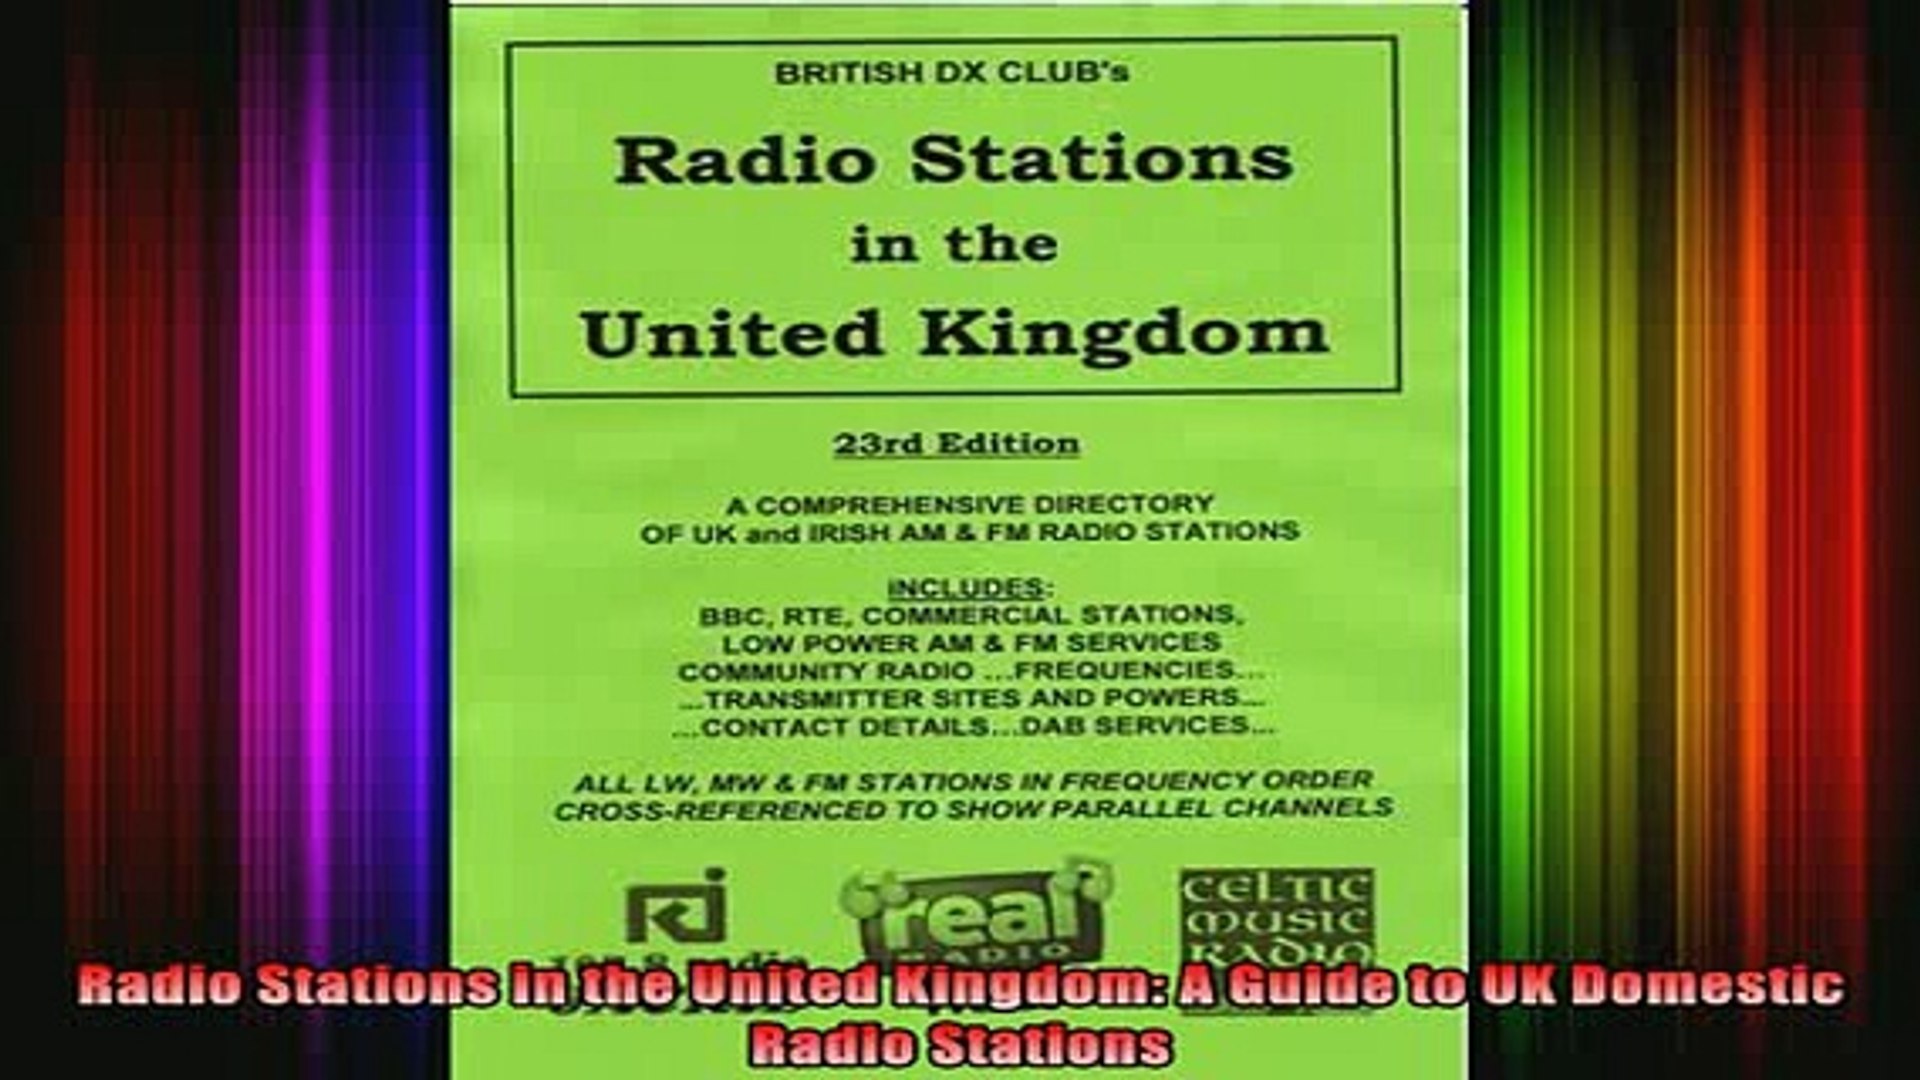 READ FREE FULL EBOOK DOWNLOAD Radio Stations in the United Kingdom A Guide  to UK Domestic Radio Stations Full Ebook Online Free - video Dailymotion